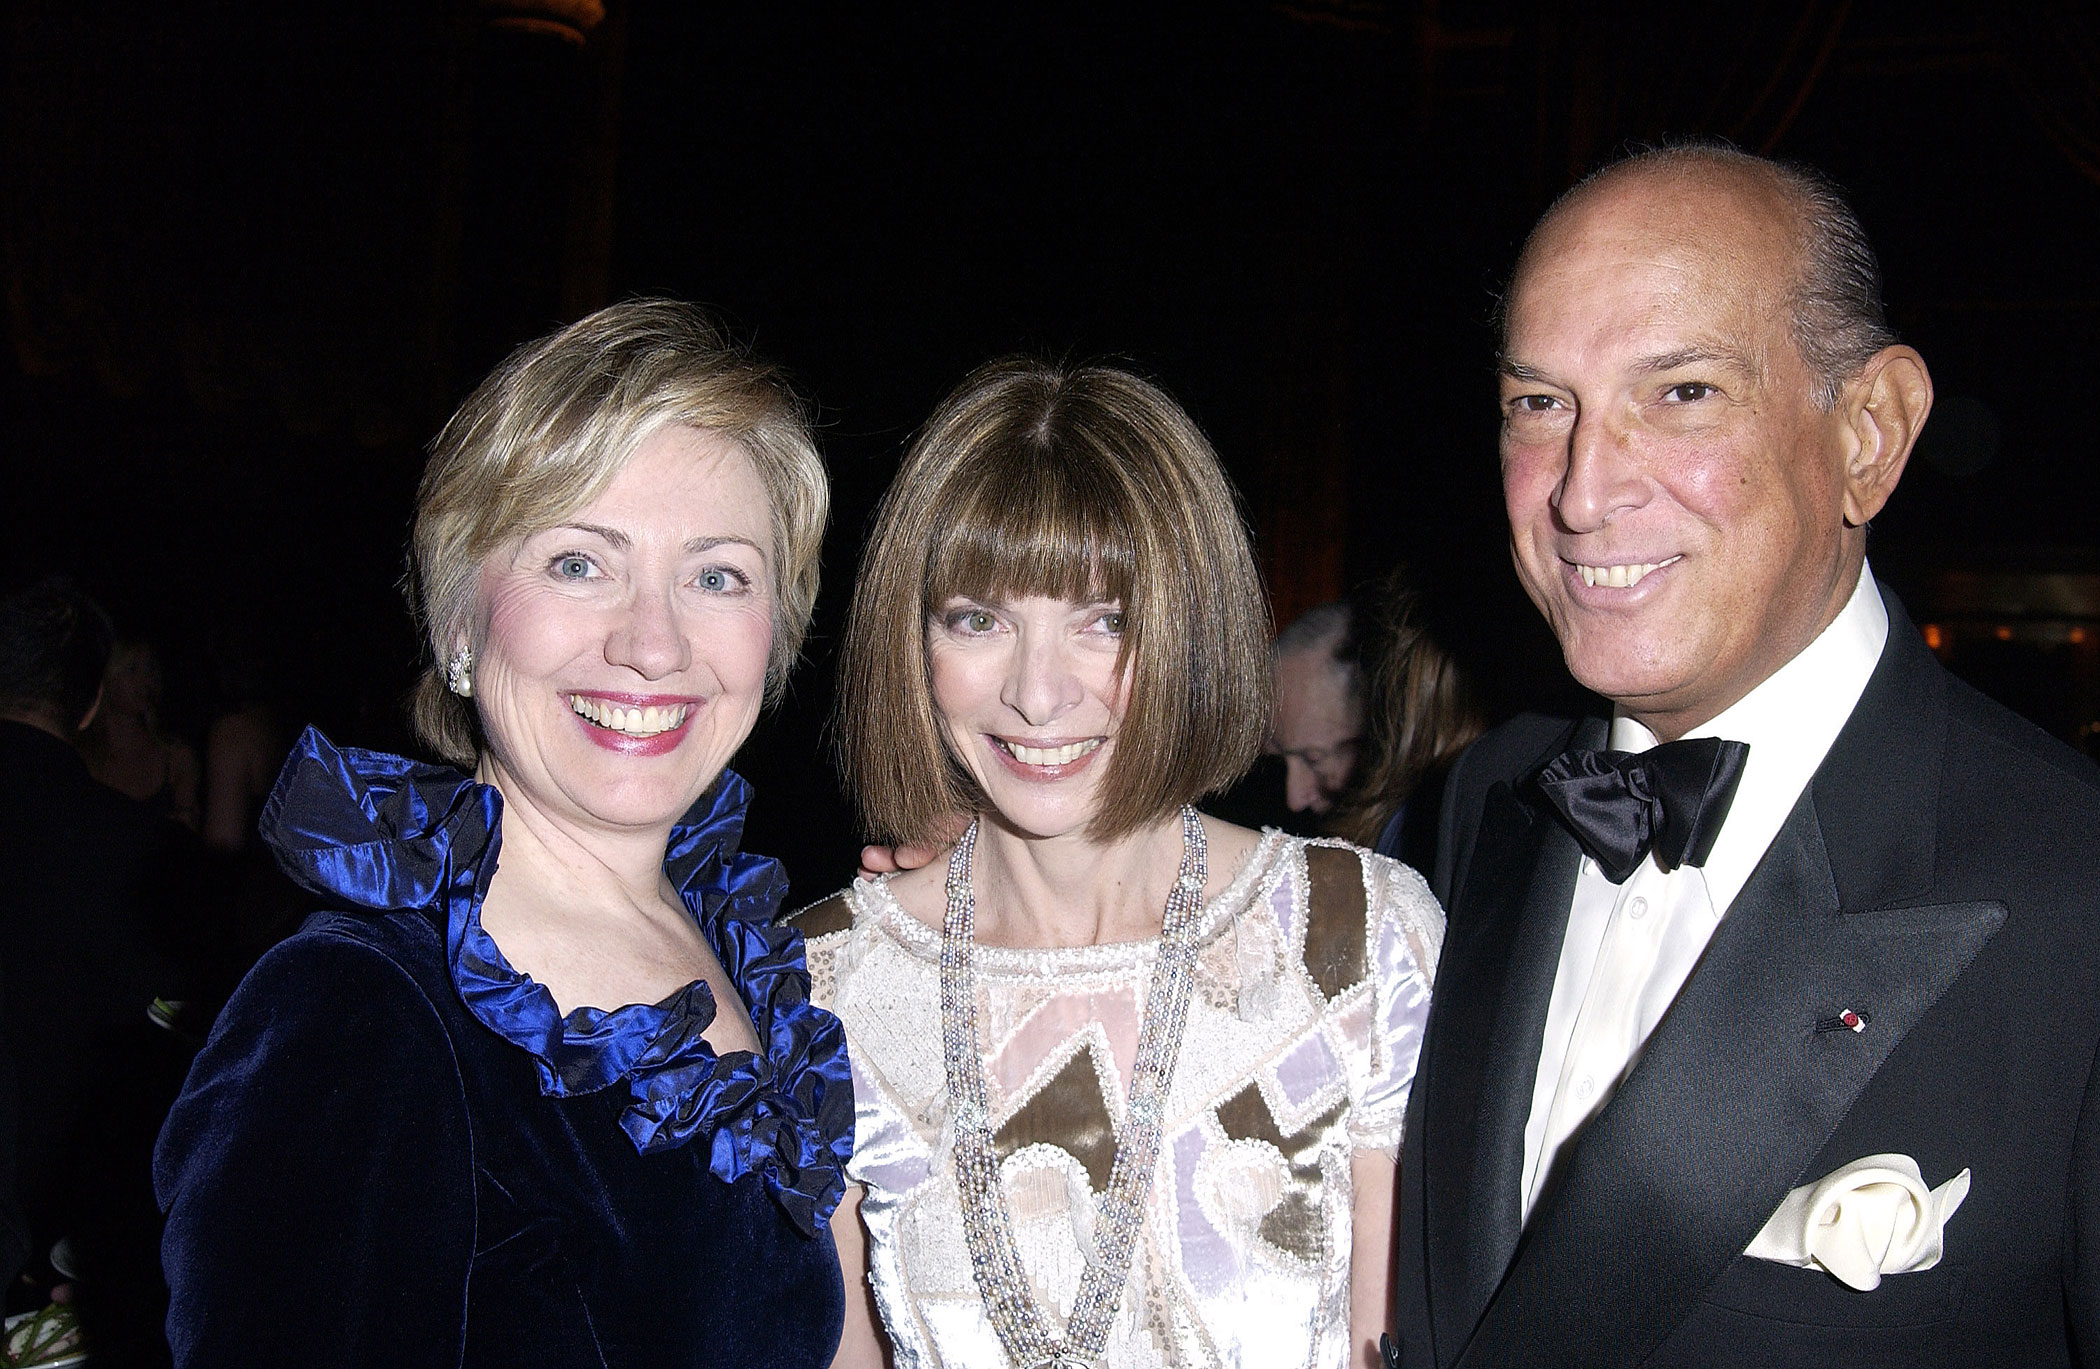 amfAR Benefit Evening Honoring Richard Gere, Lorne Michaels and Anna Wintour - Party